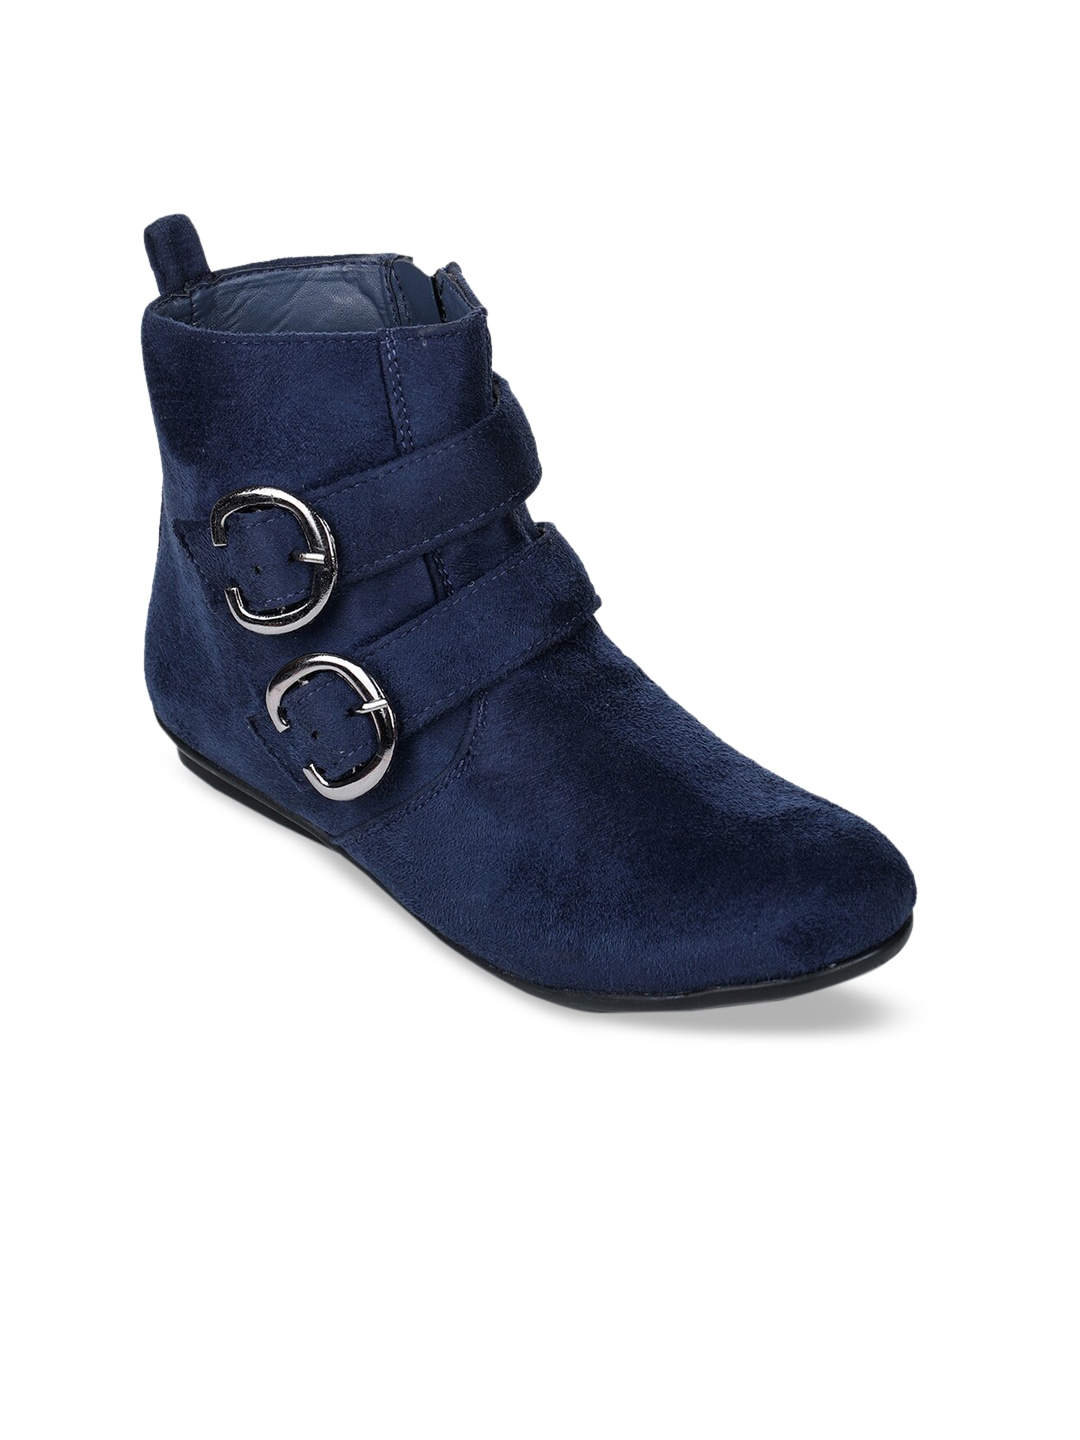 Bruno Manetti Women Navy Blue Solid Suede High-Top Flat Boots Price in India